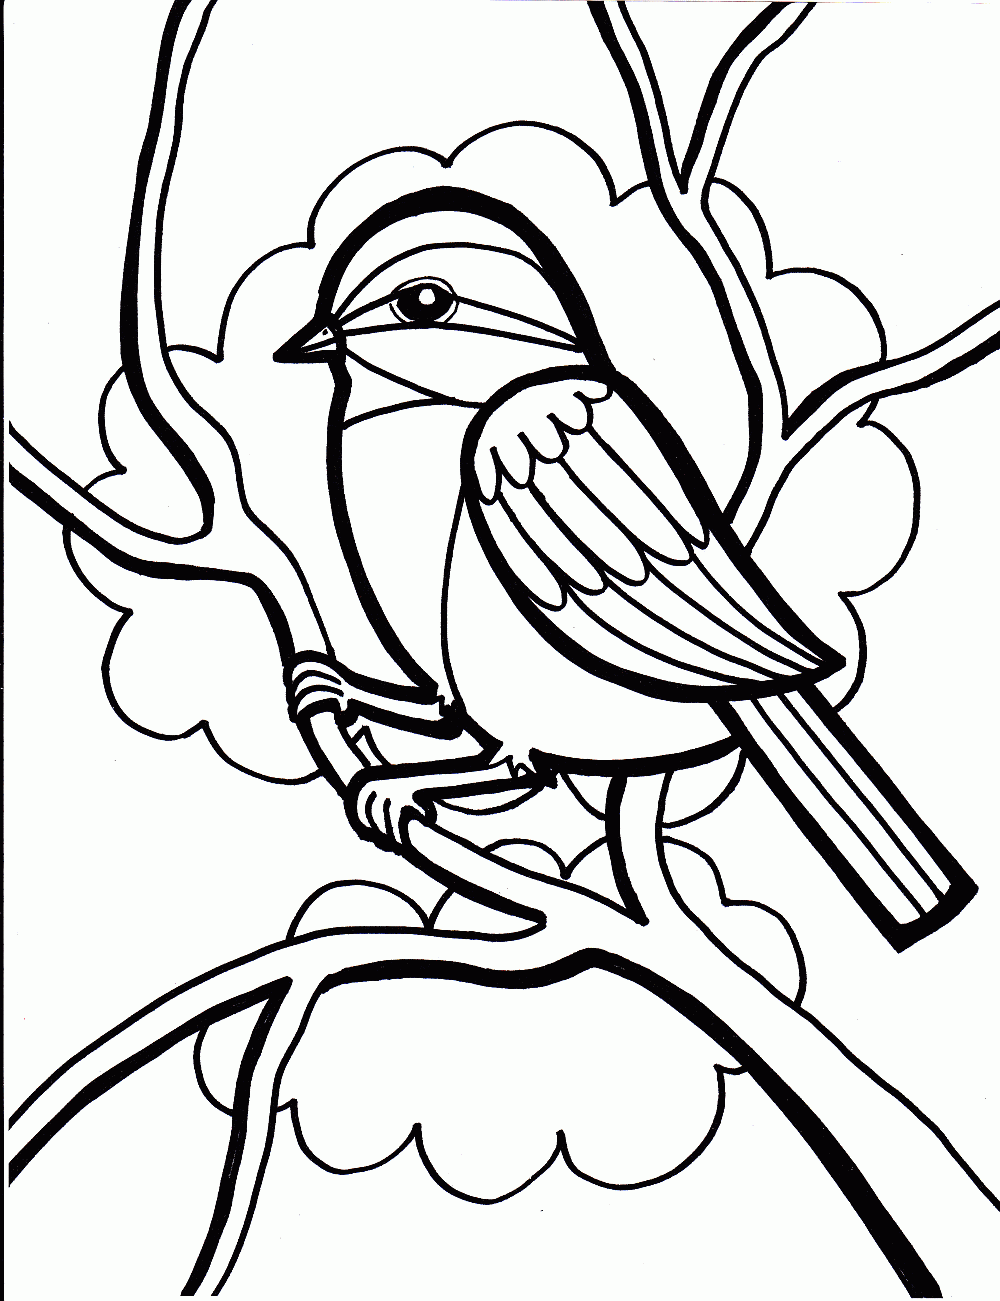 Free Sparrow Coloring Page, Download Free Sparrow Coloring Page ...